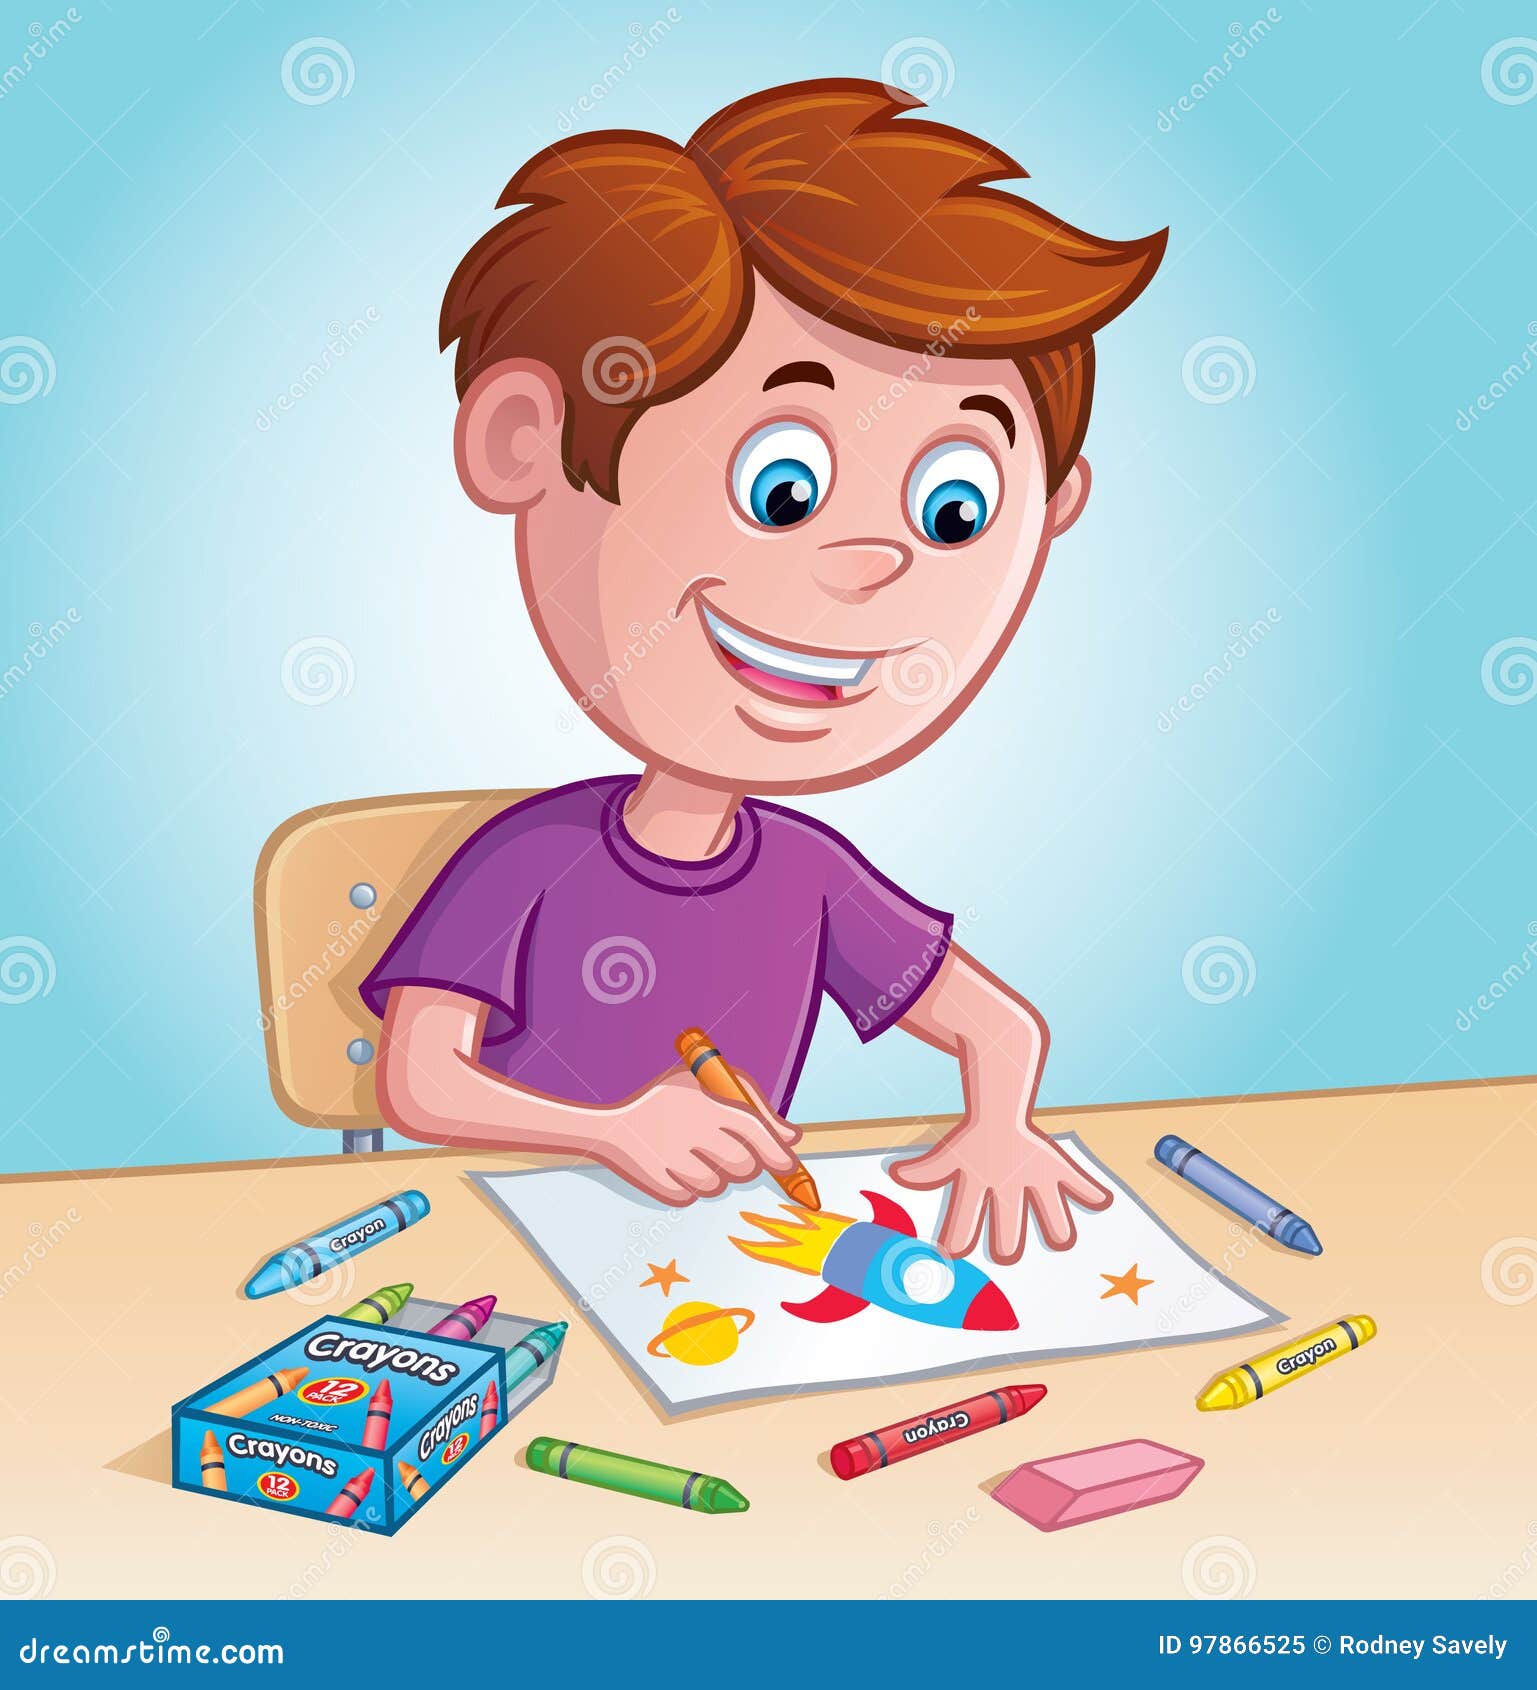 Baby Boy Drawing With Crayons by Stocksy Contributor Mosuno - Stocksy